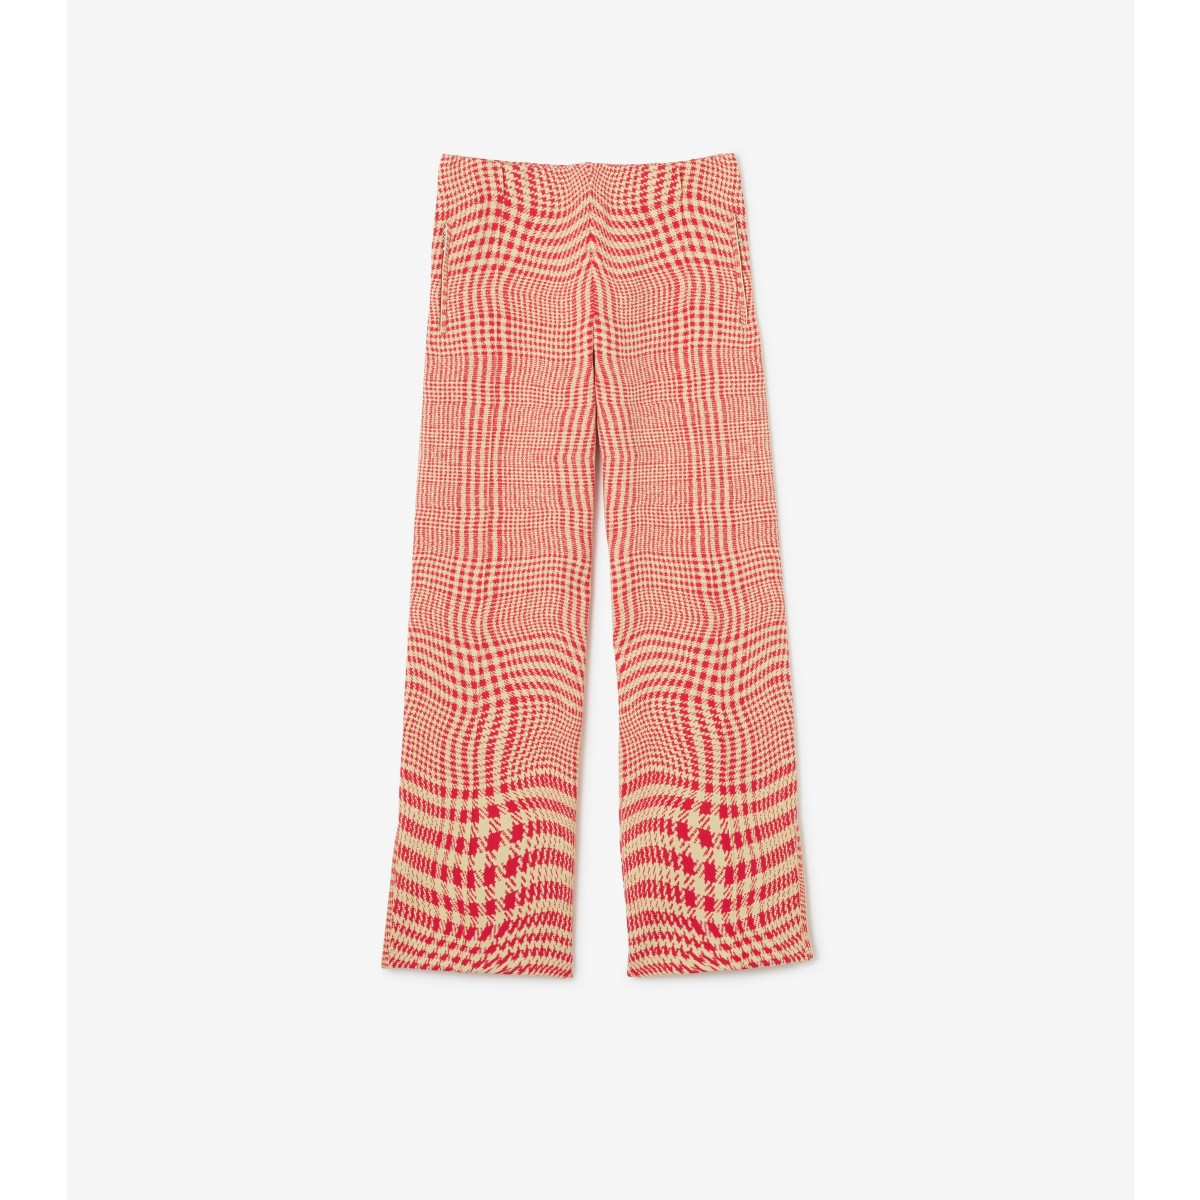 Burberry Warped Houndstooth Nylon Blend Track Pants In Pillar